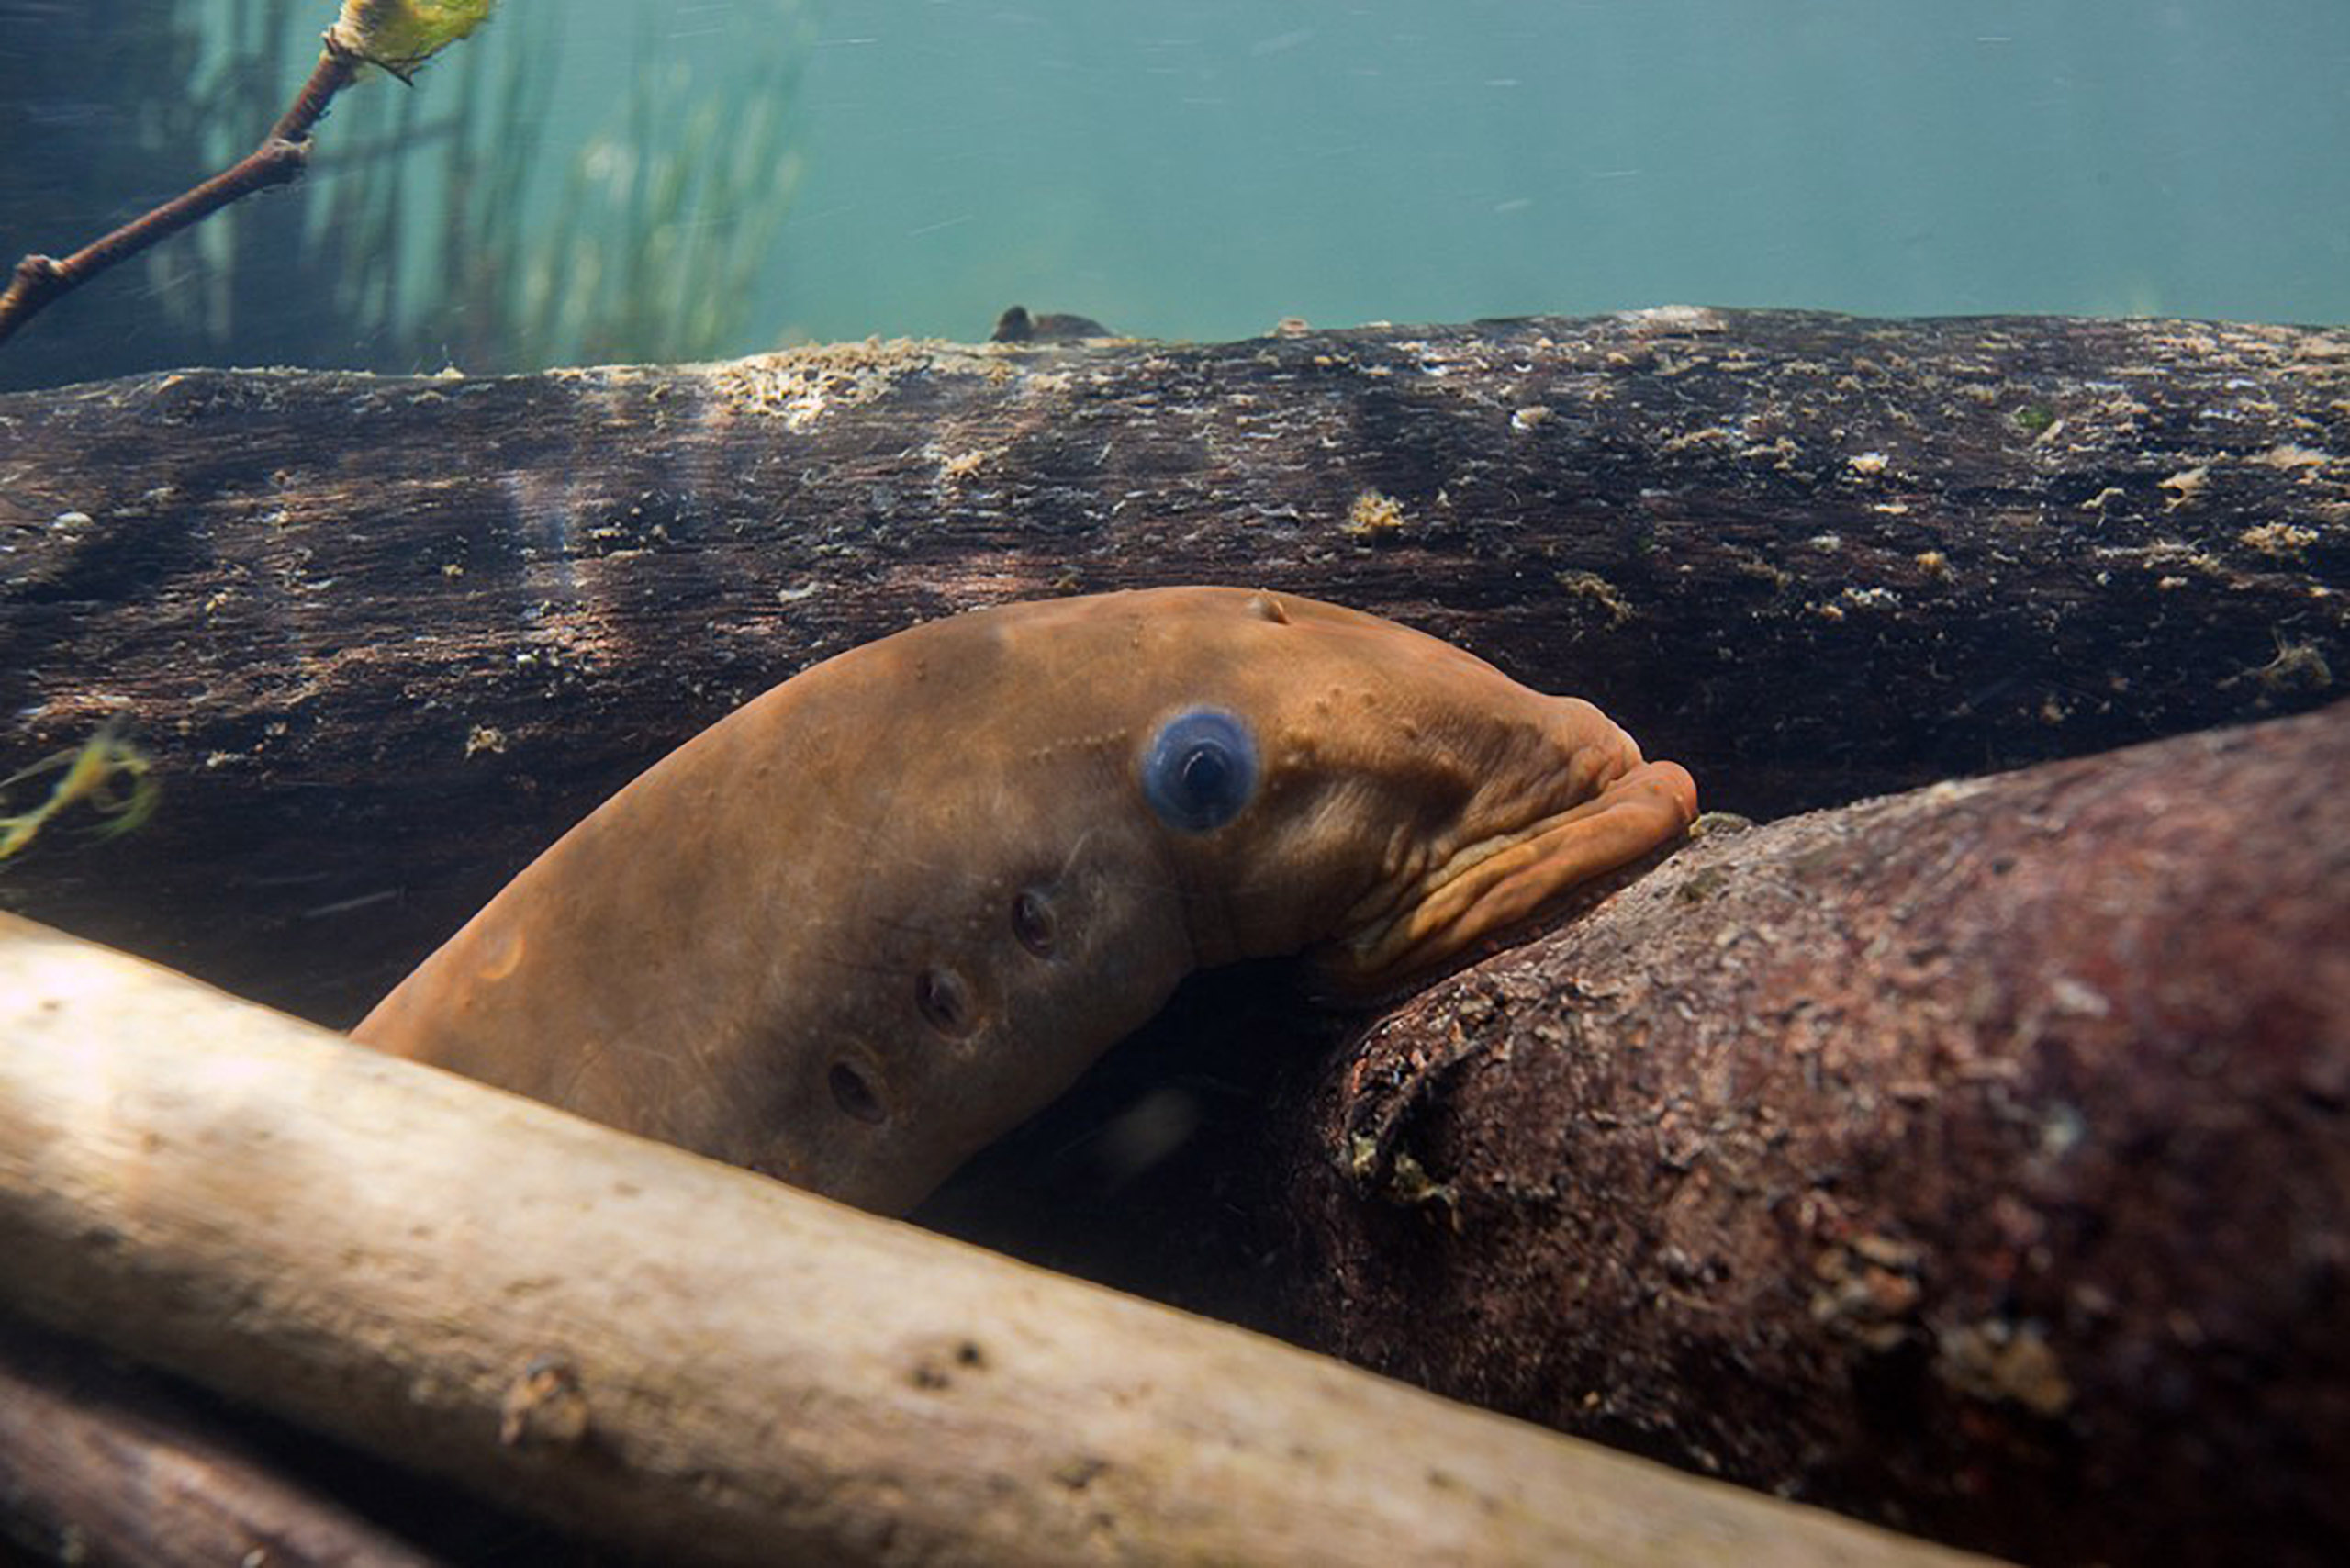 A Pacific lamprey attached to rocks at the bottom of a body of water